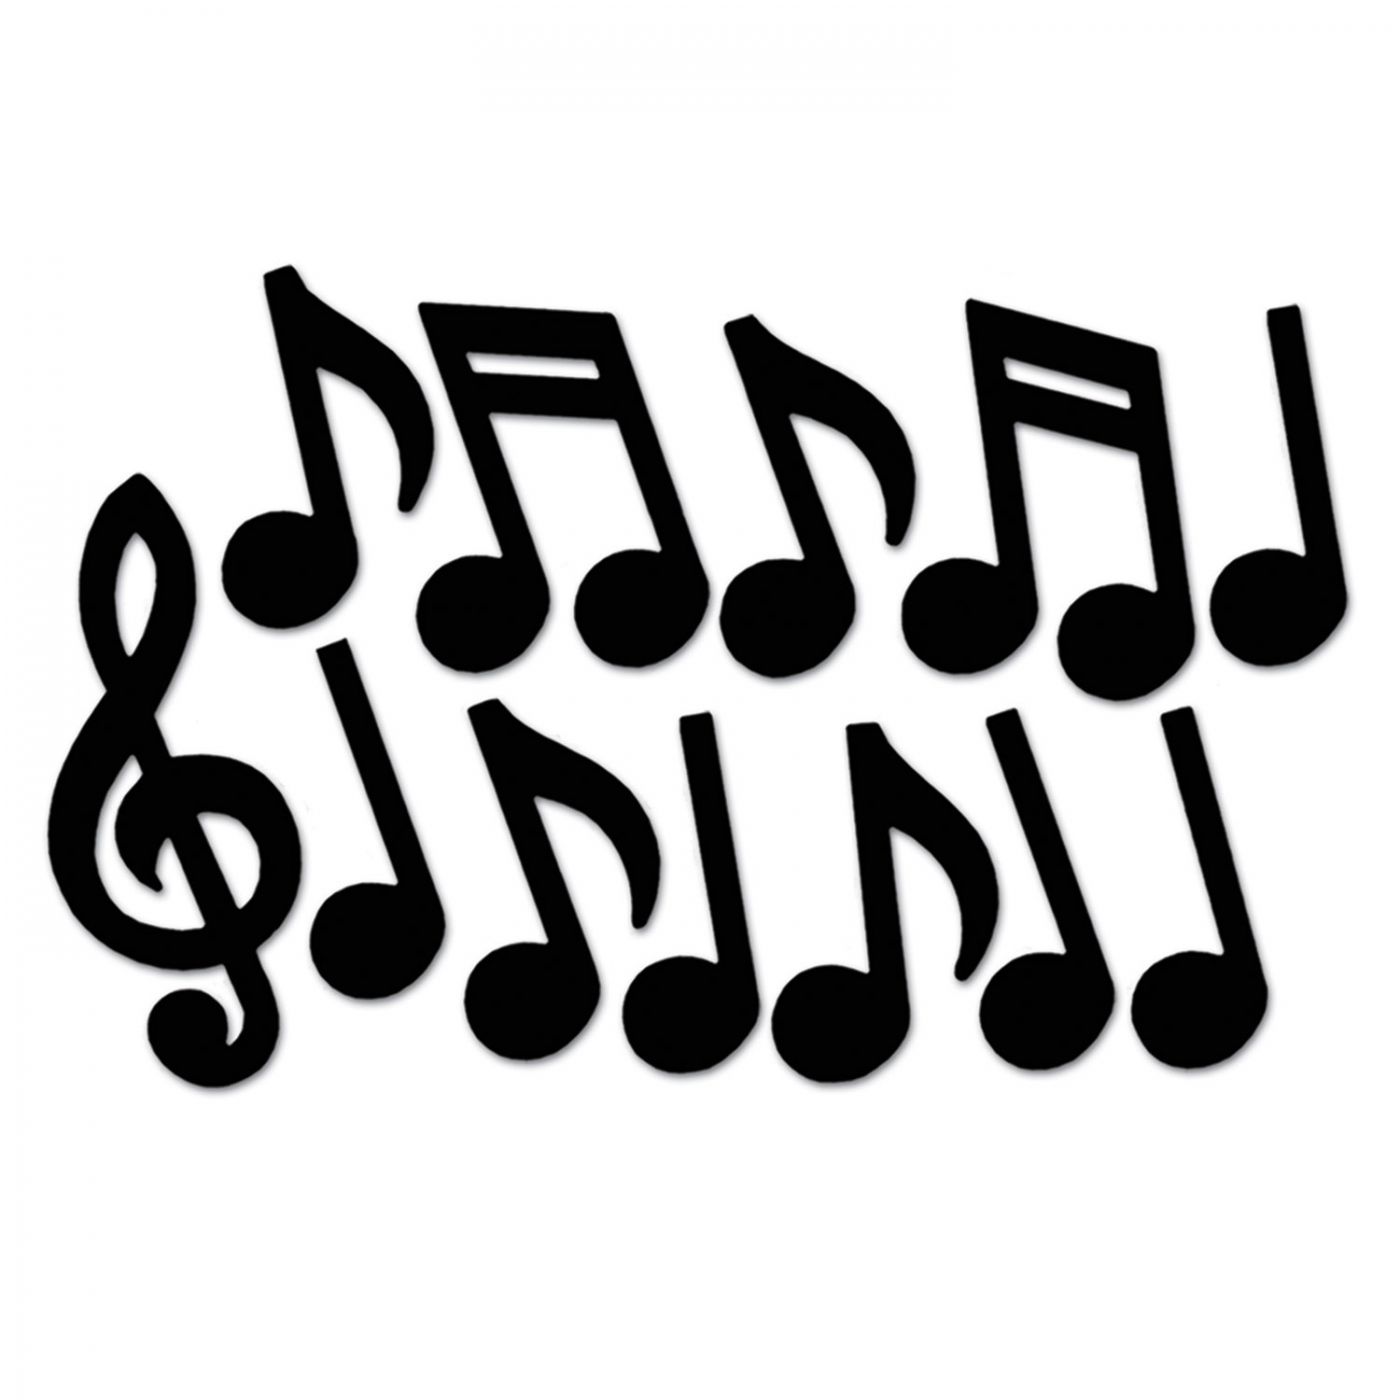 Musical Notes Silhouettes image